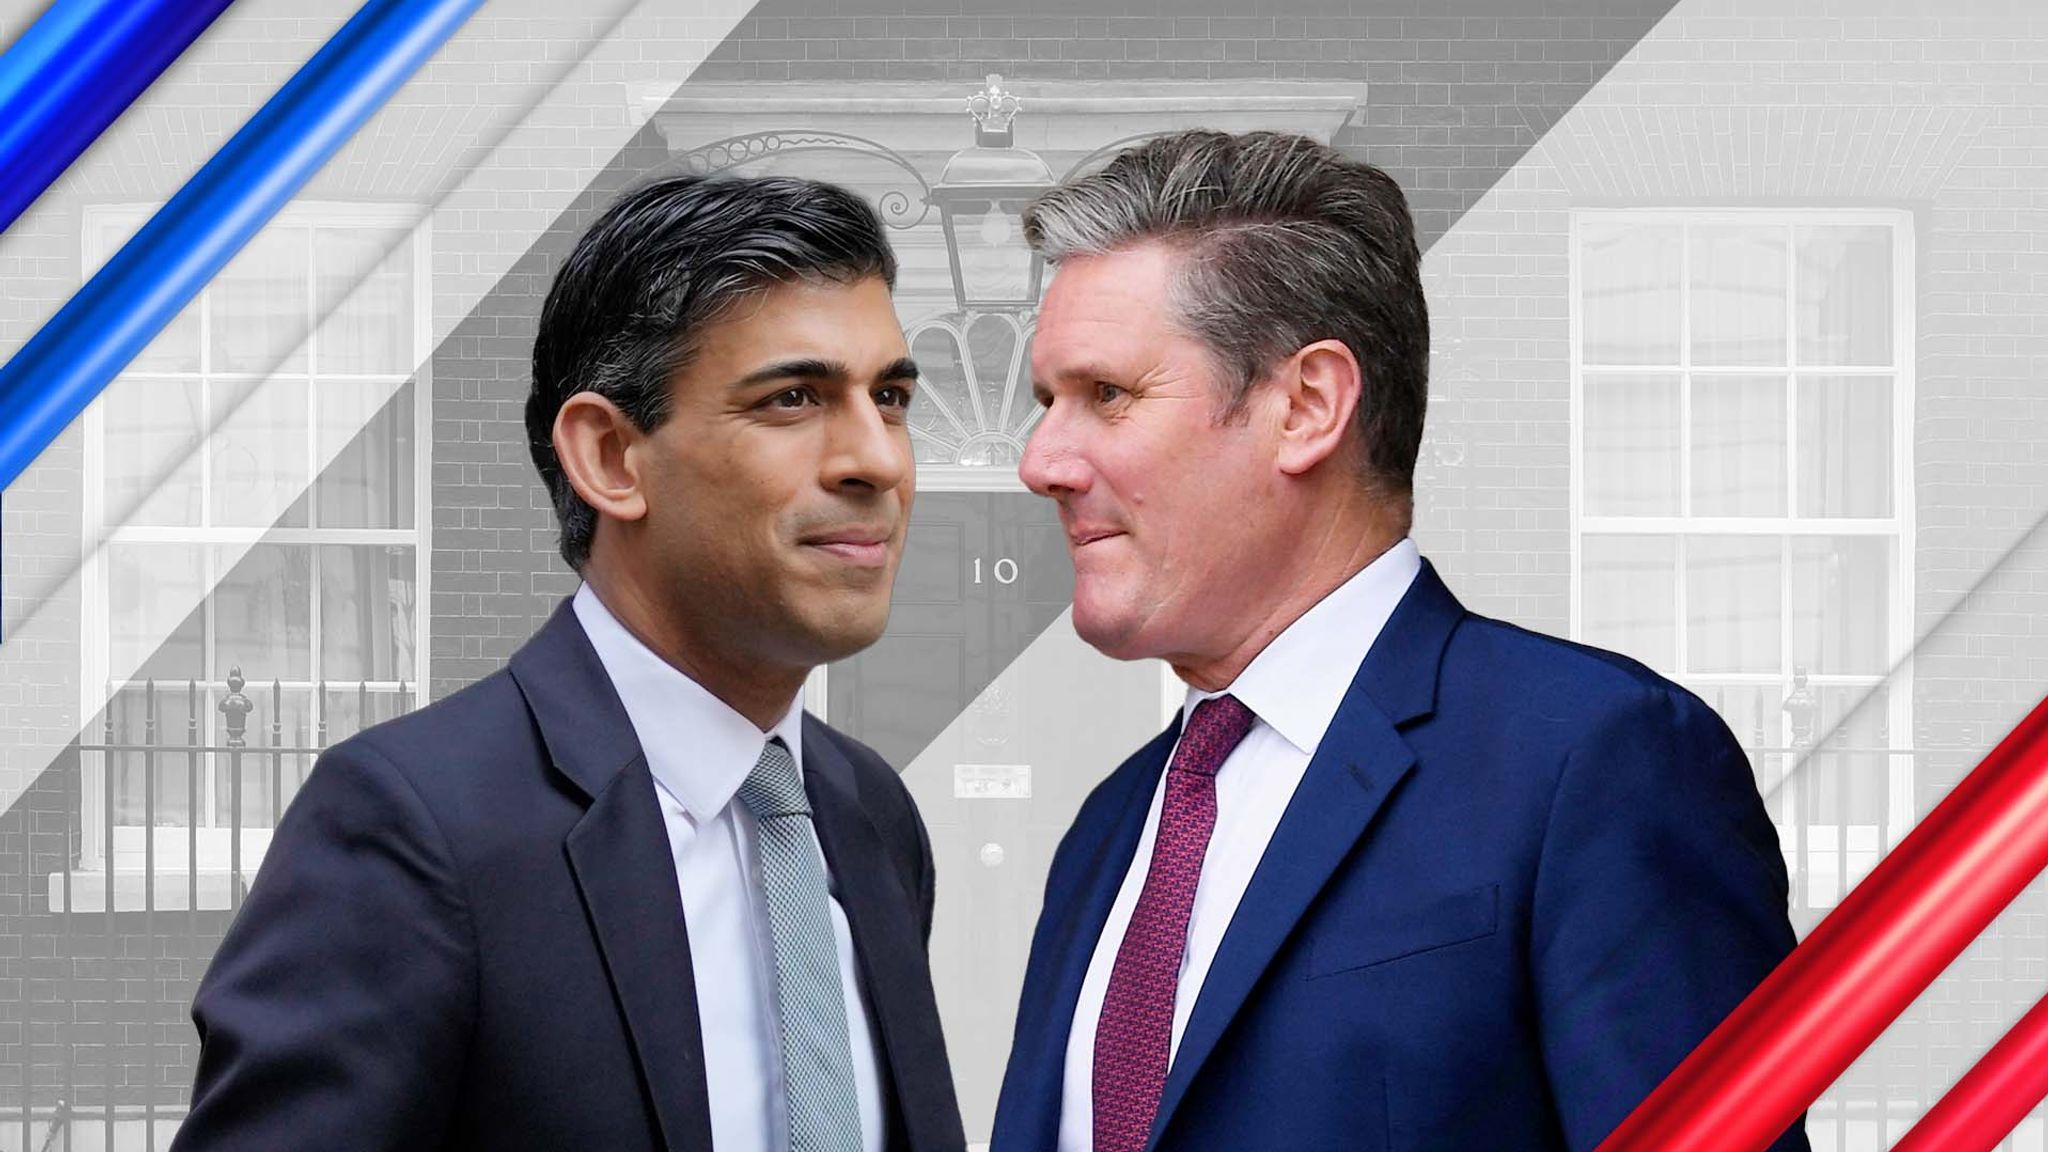 Rishi Sunak Vs Keir Starmer How Do They Measure Up In The Eyes Of Voters Politics News Sky